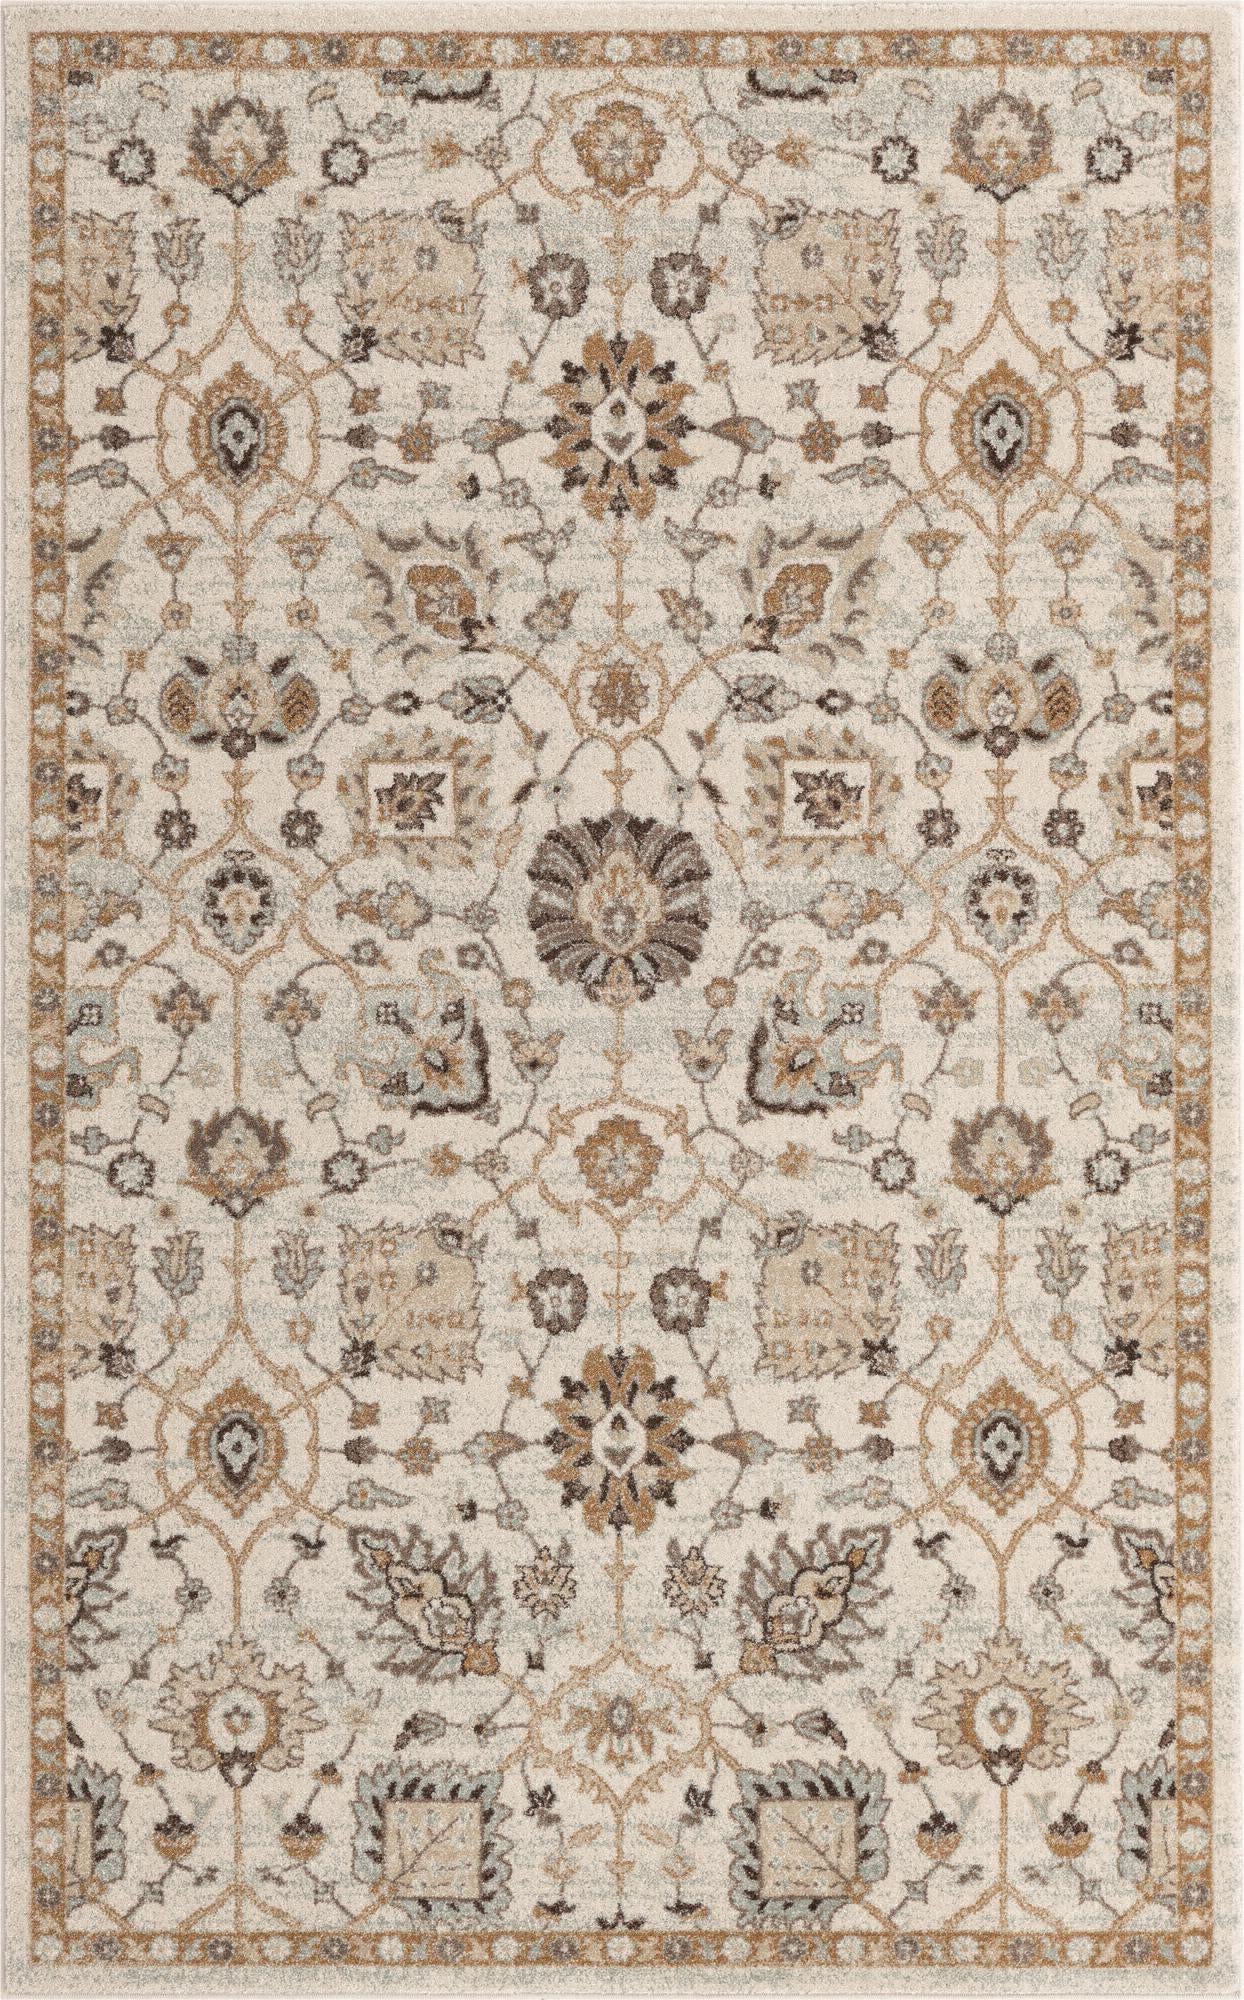 Unique Loom Tradition T-Heritage-5205a Ivory Area Rug main image